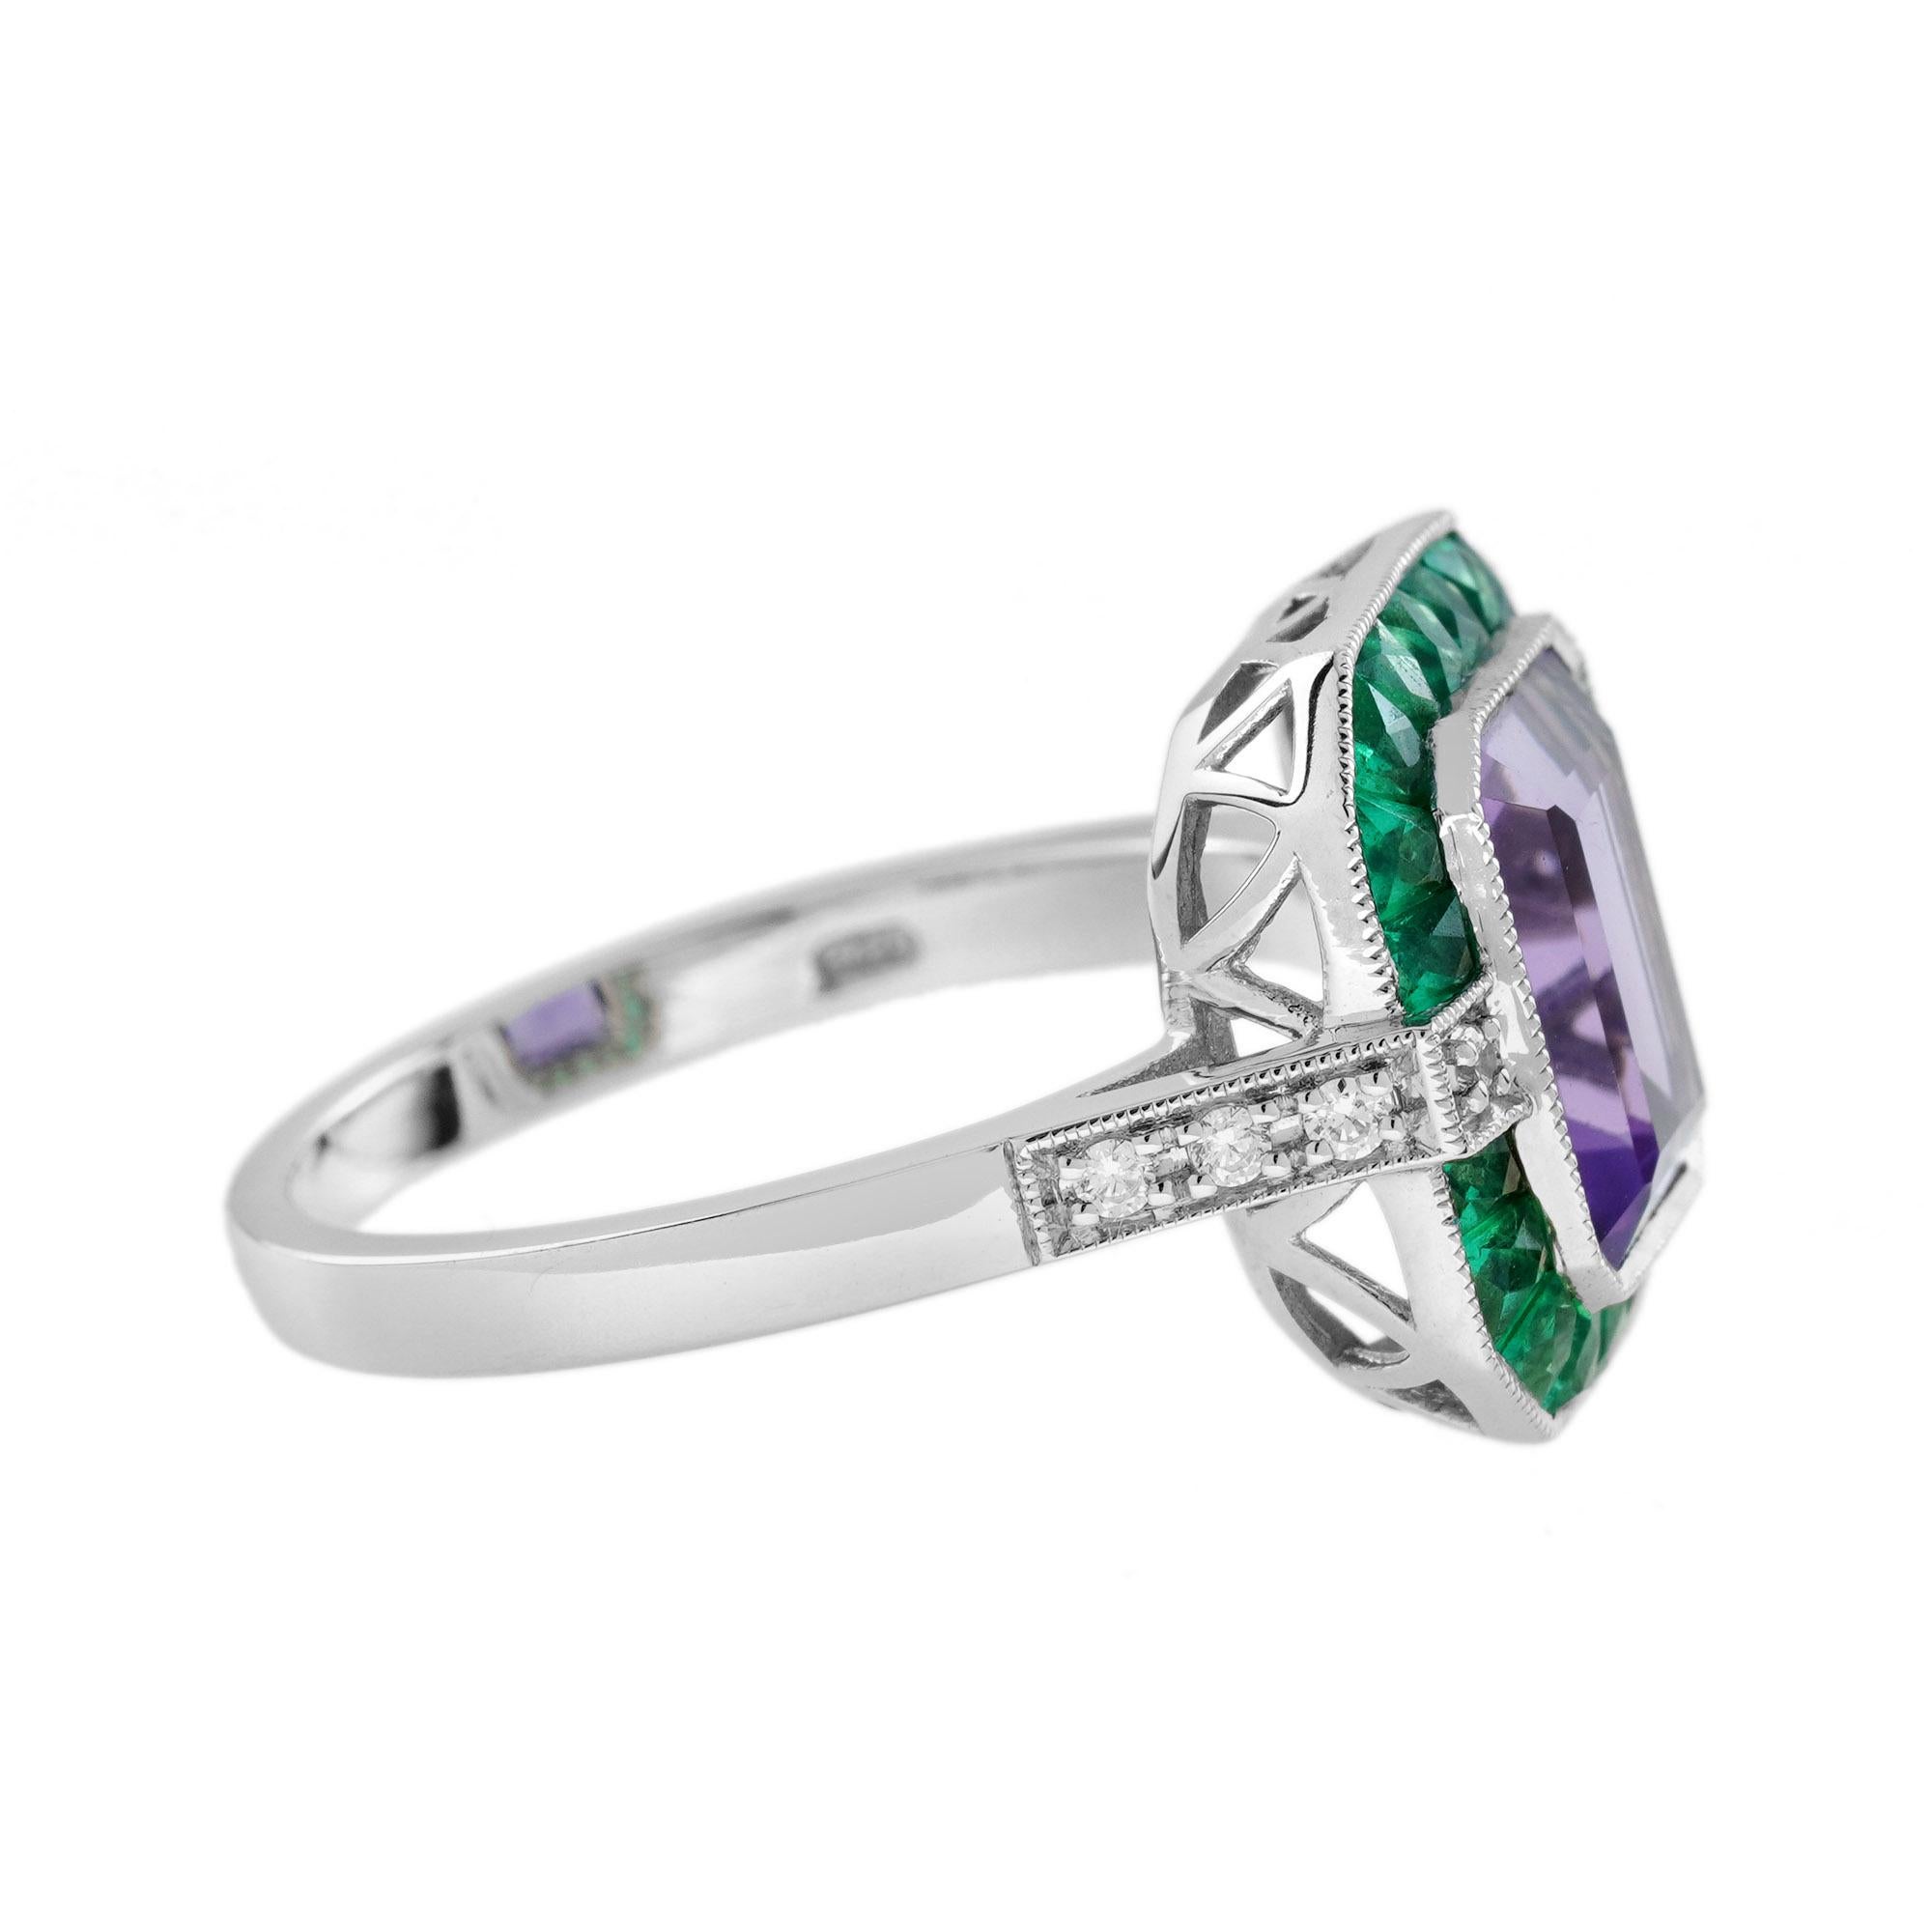 For Sale:  Emerald Cut Amethyst Emerald and Diamond Art Deco Style Ring in 14K White Gold 4